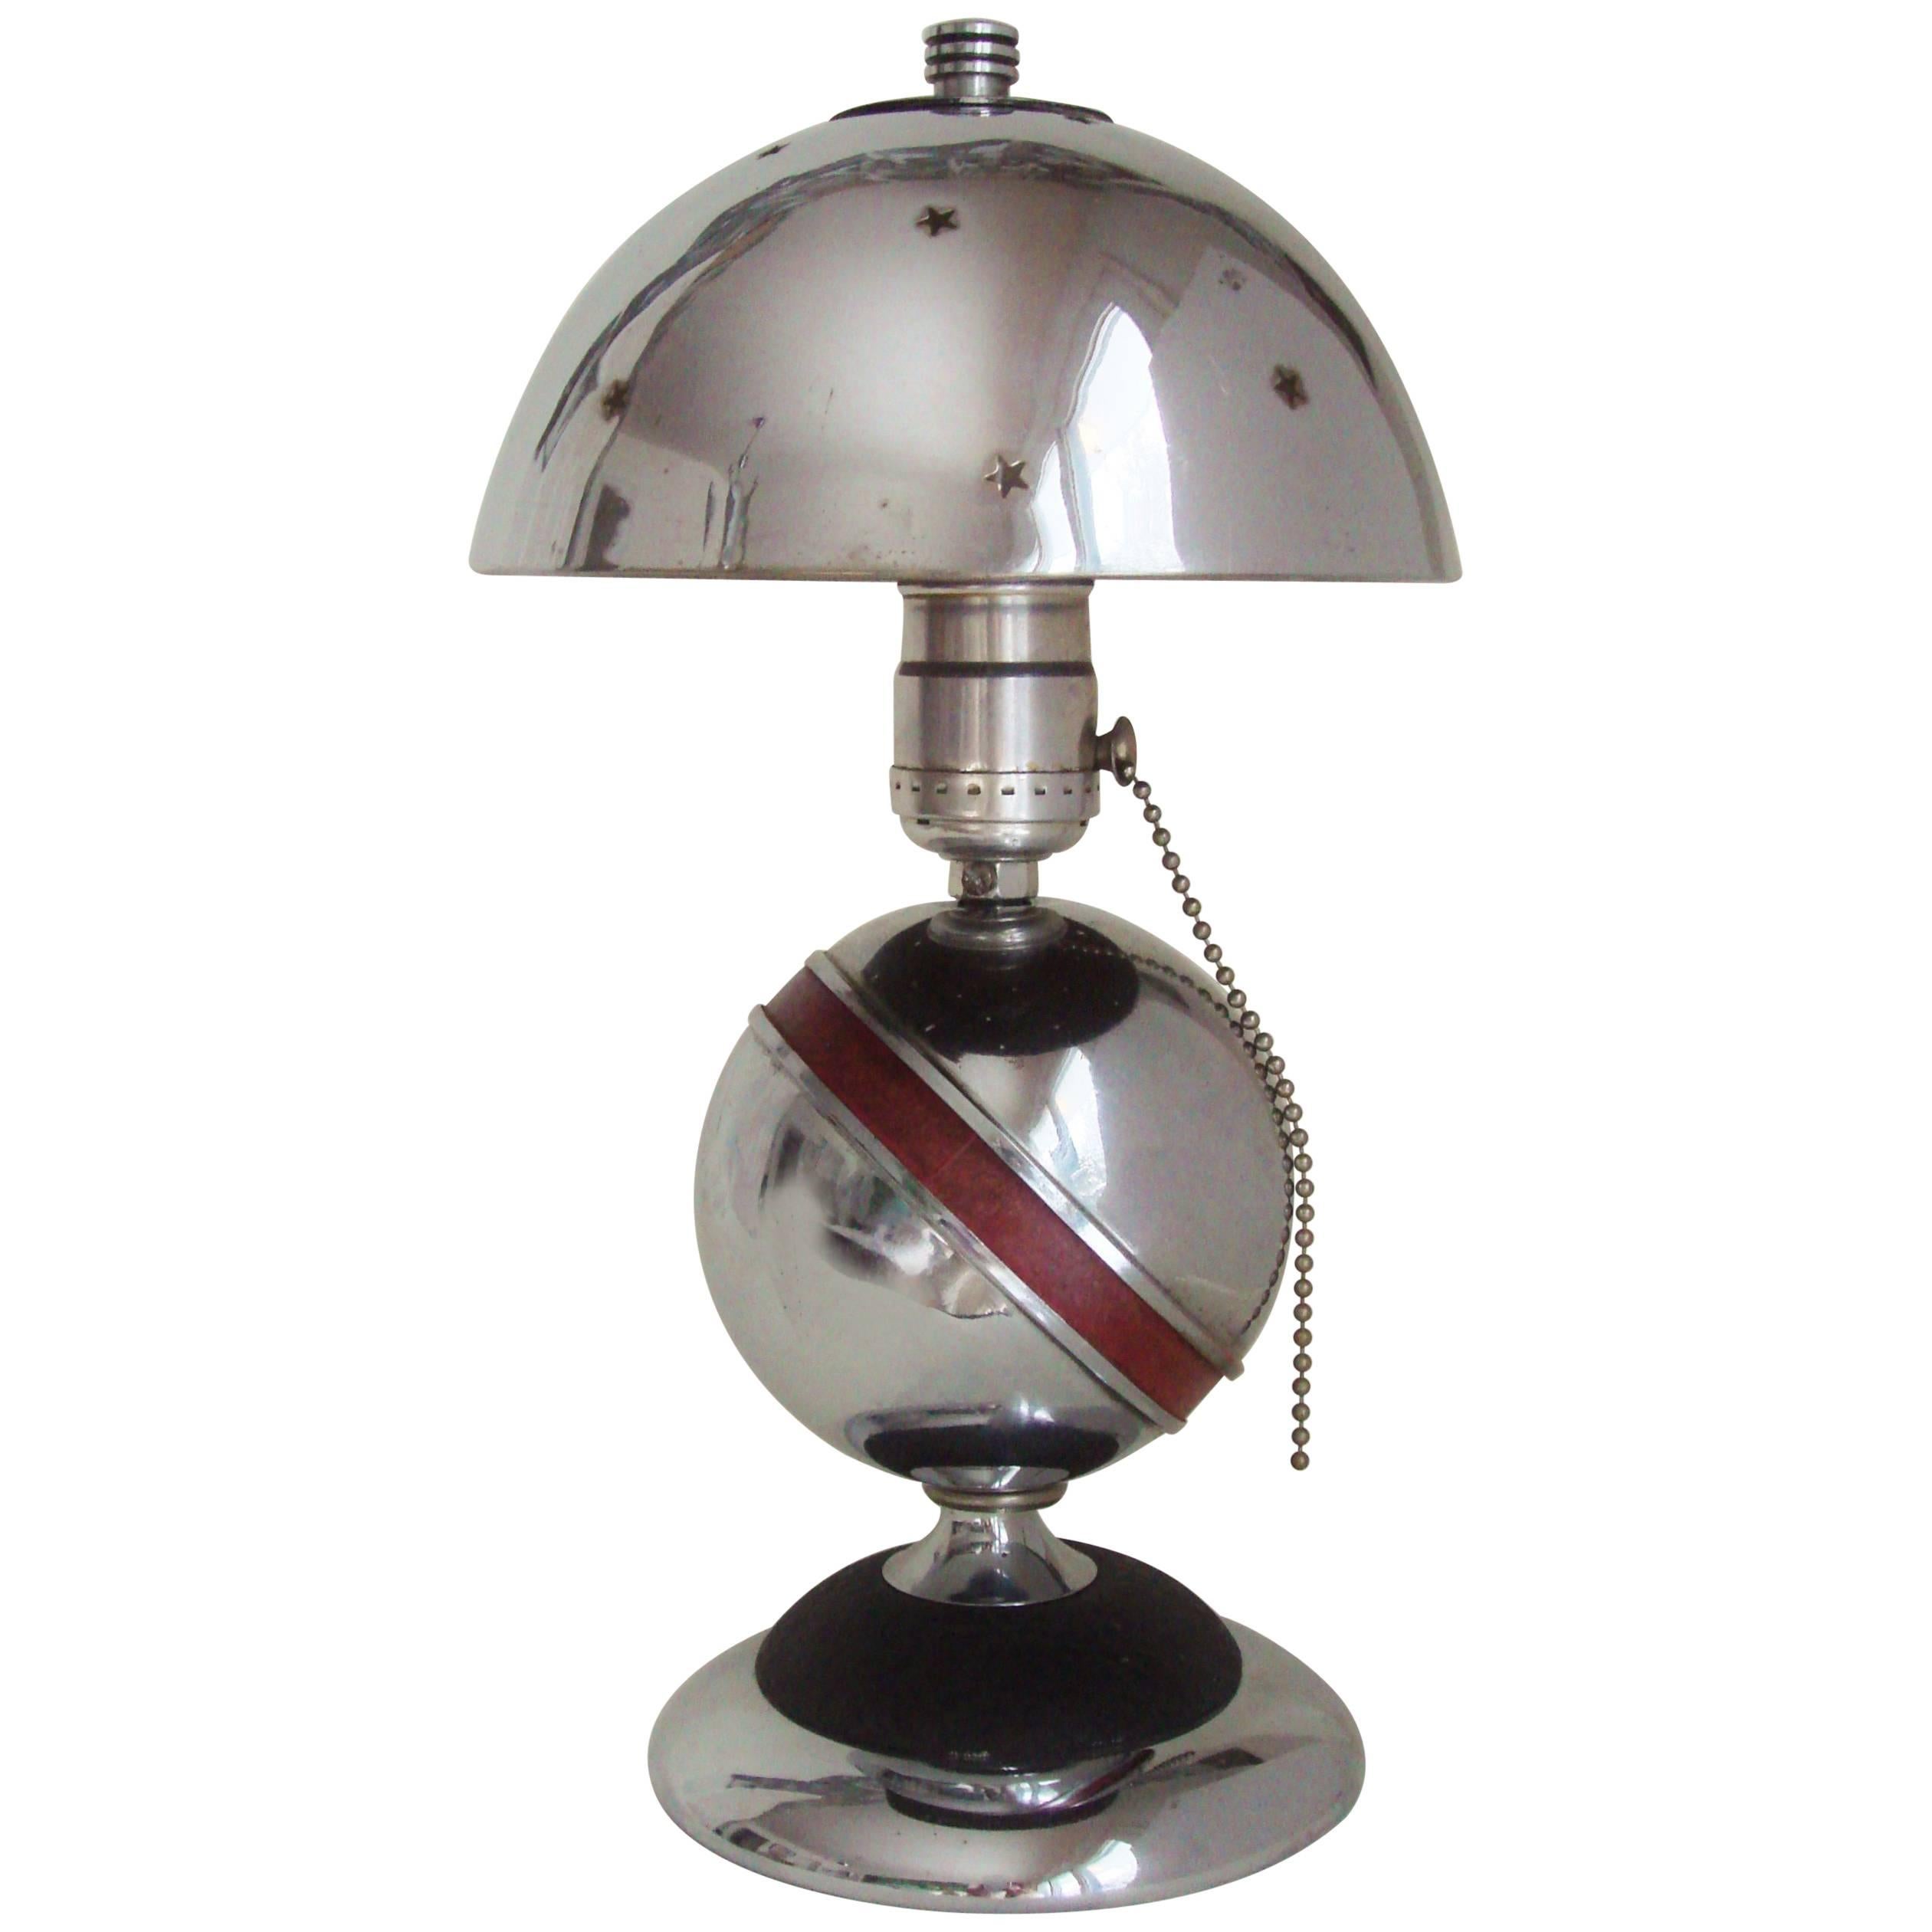 Rare American Art Deco Chrome, Black and Red Saturn Lamp with Star Pierced Shade